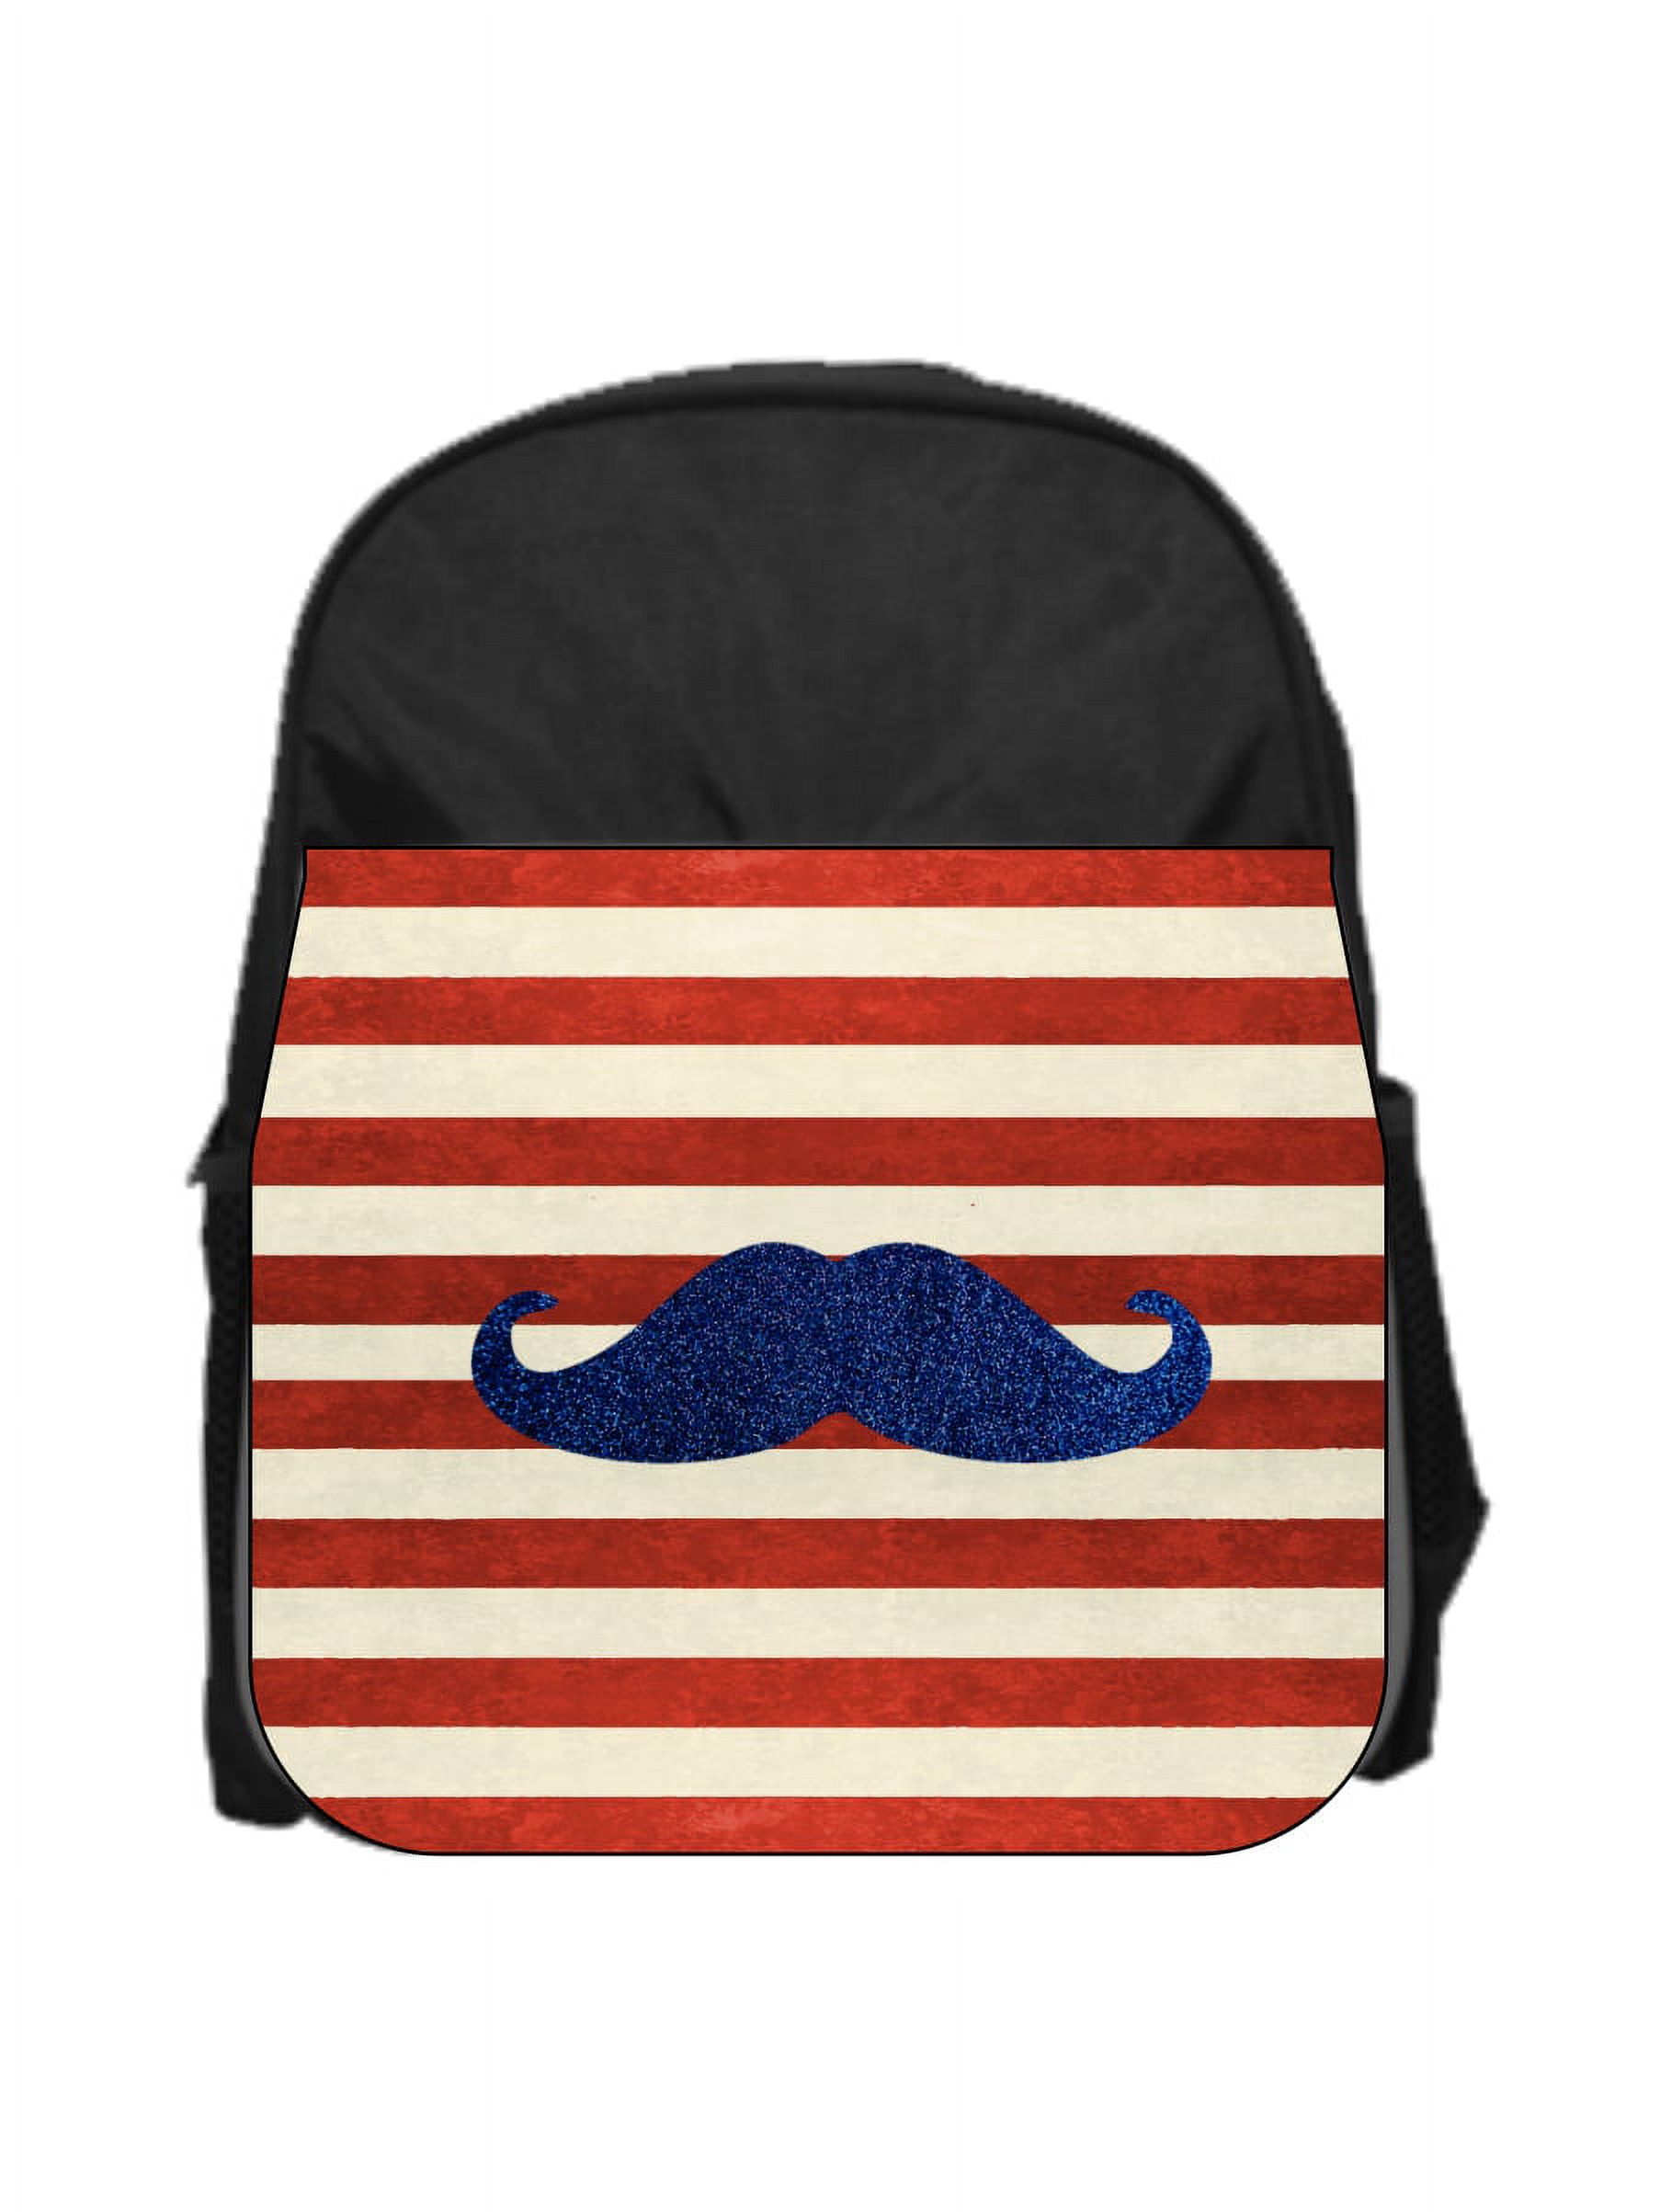 Hipster Blue Mustache on Beige and Red Stripes - 13" x 10" Black Preschool Toddler Children's Backpack - image 1 of 2